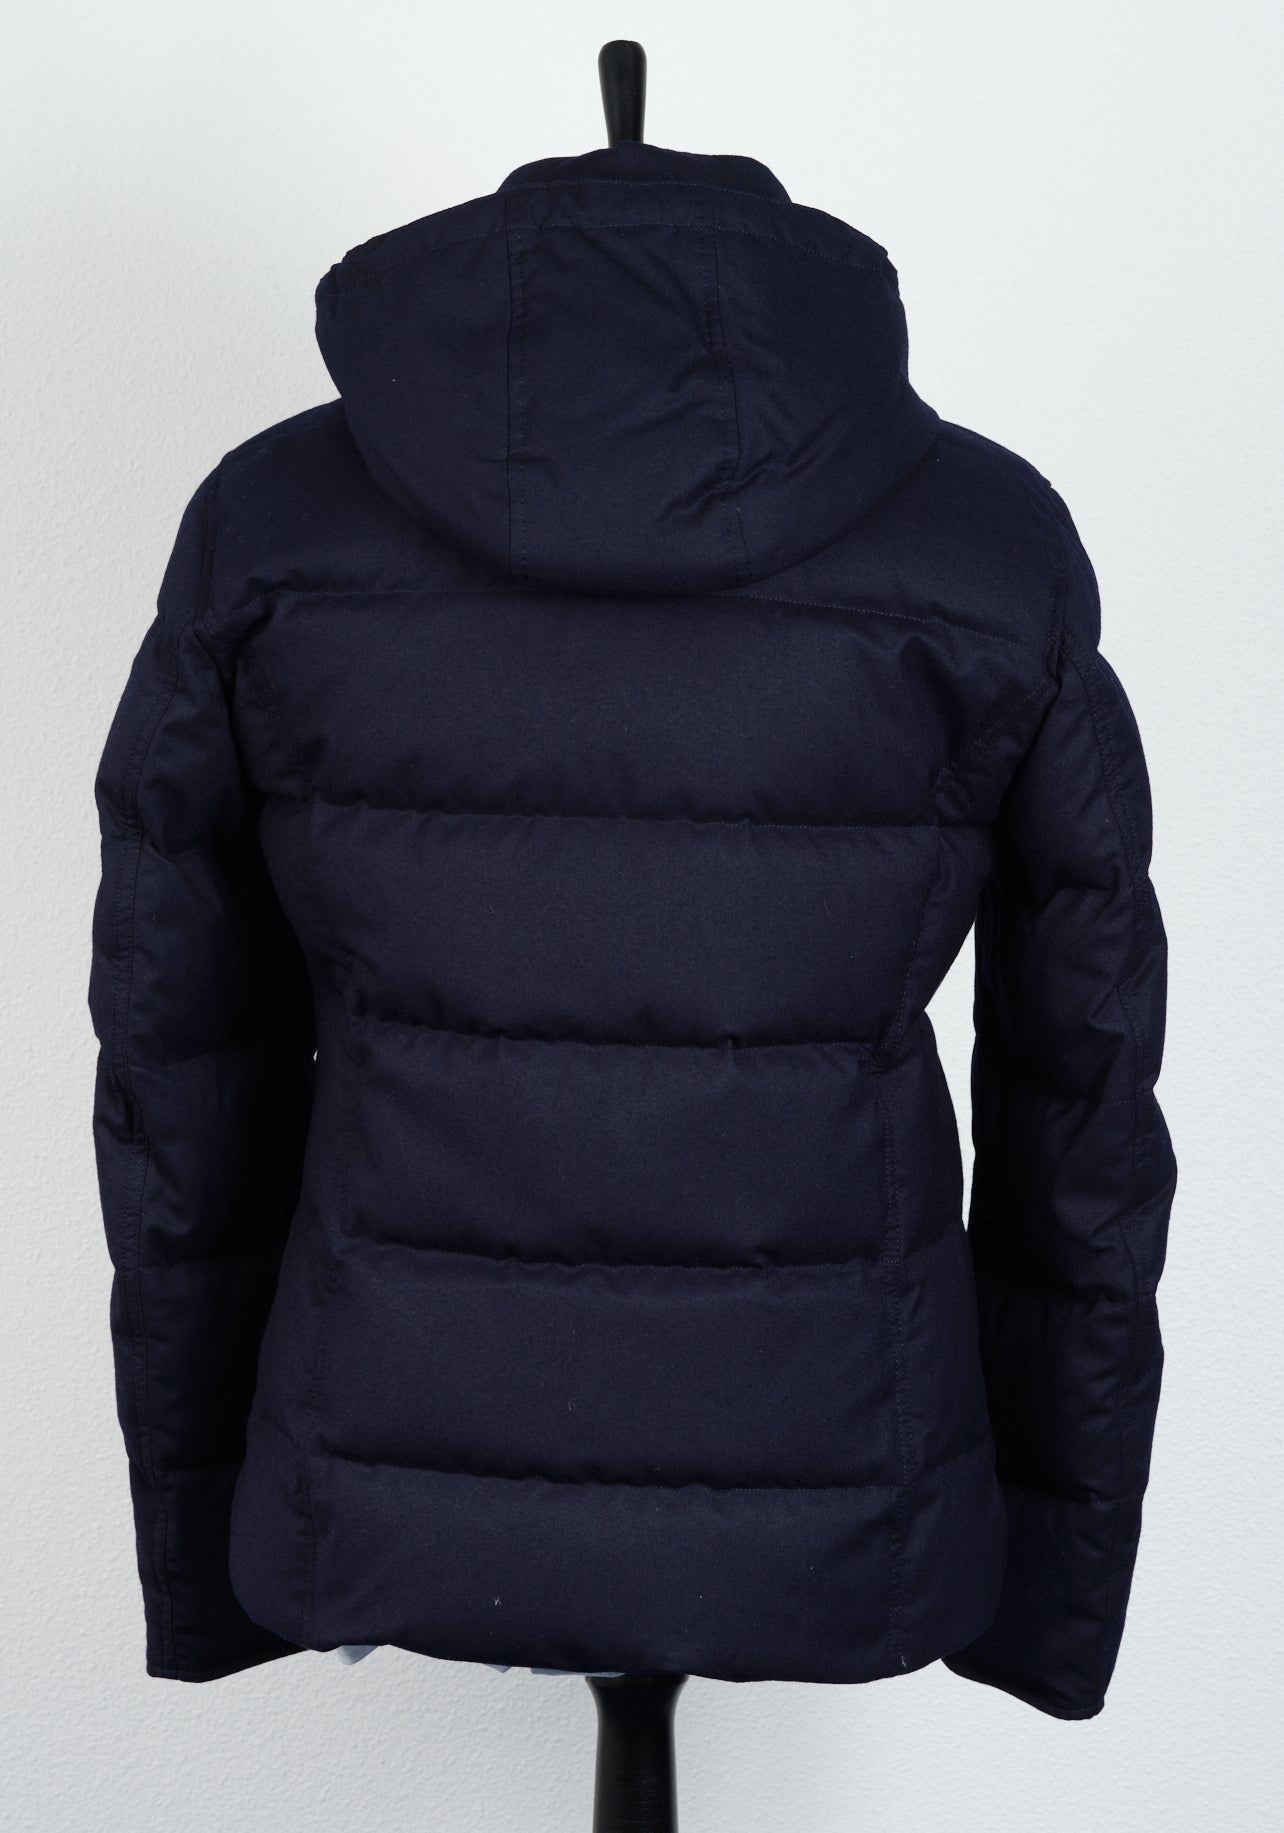 New Suitsupply Orlando Navy Blue Wool and Polyurethane Down Jacket